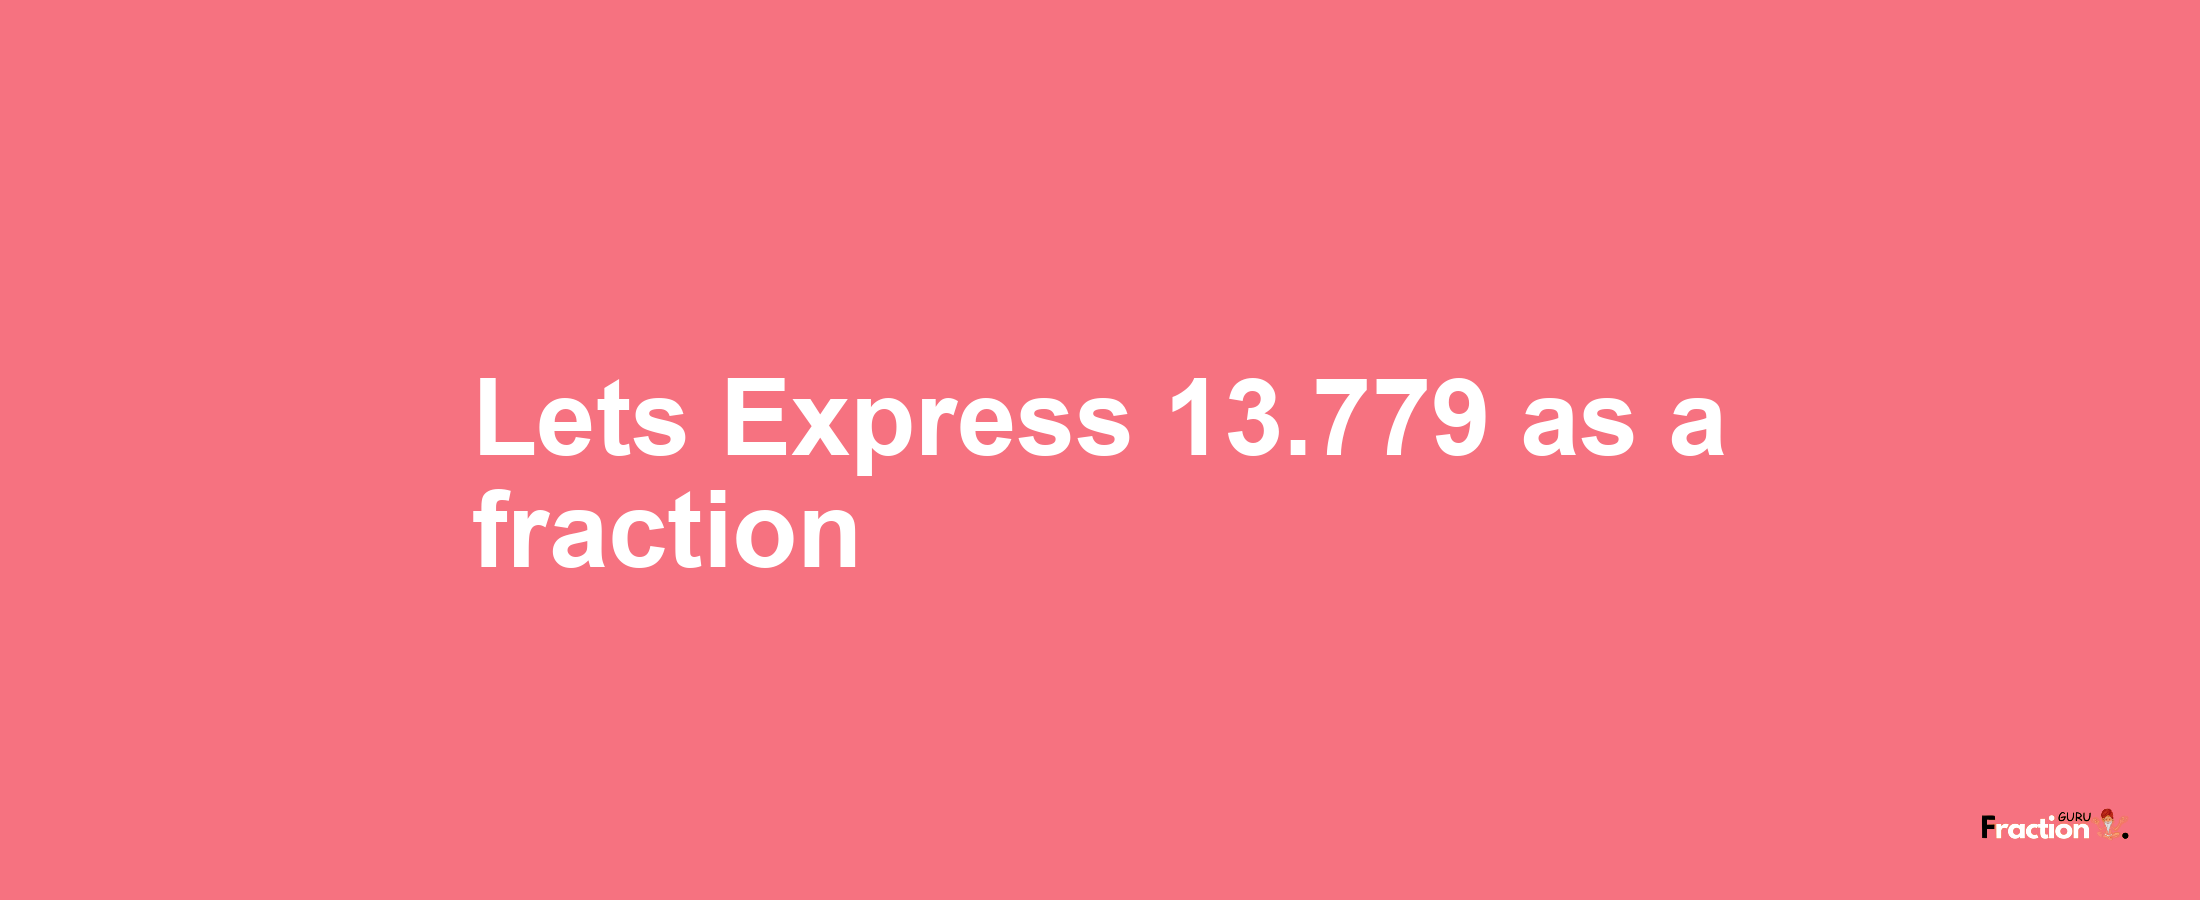 Lets Express 13.779 as afraction